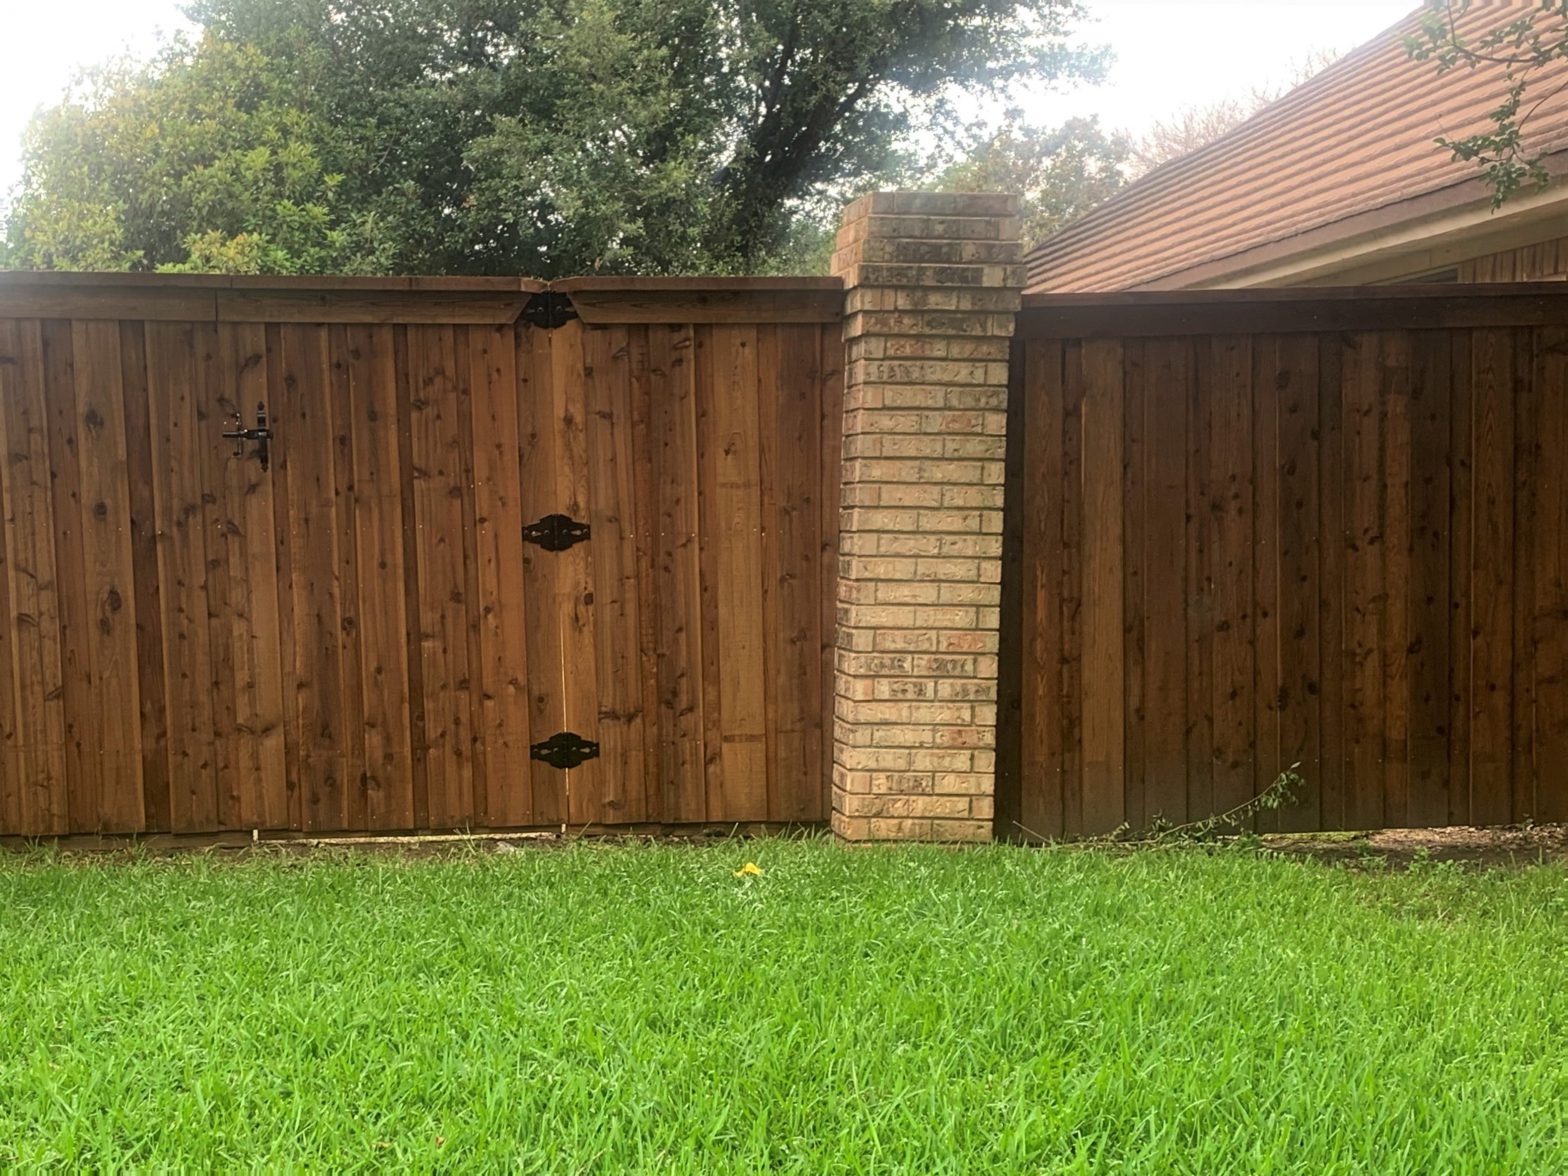 Photo of a stained wood fence with brick pillars